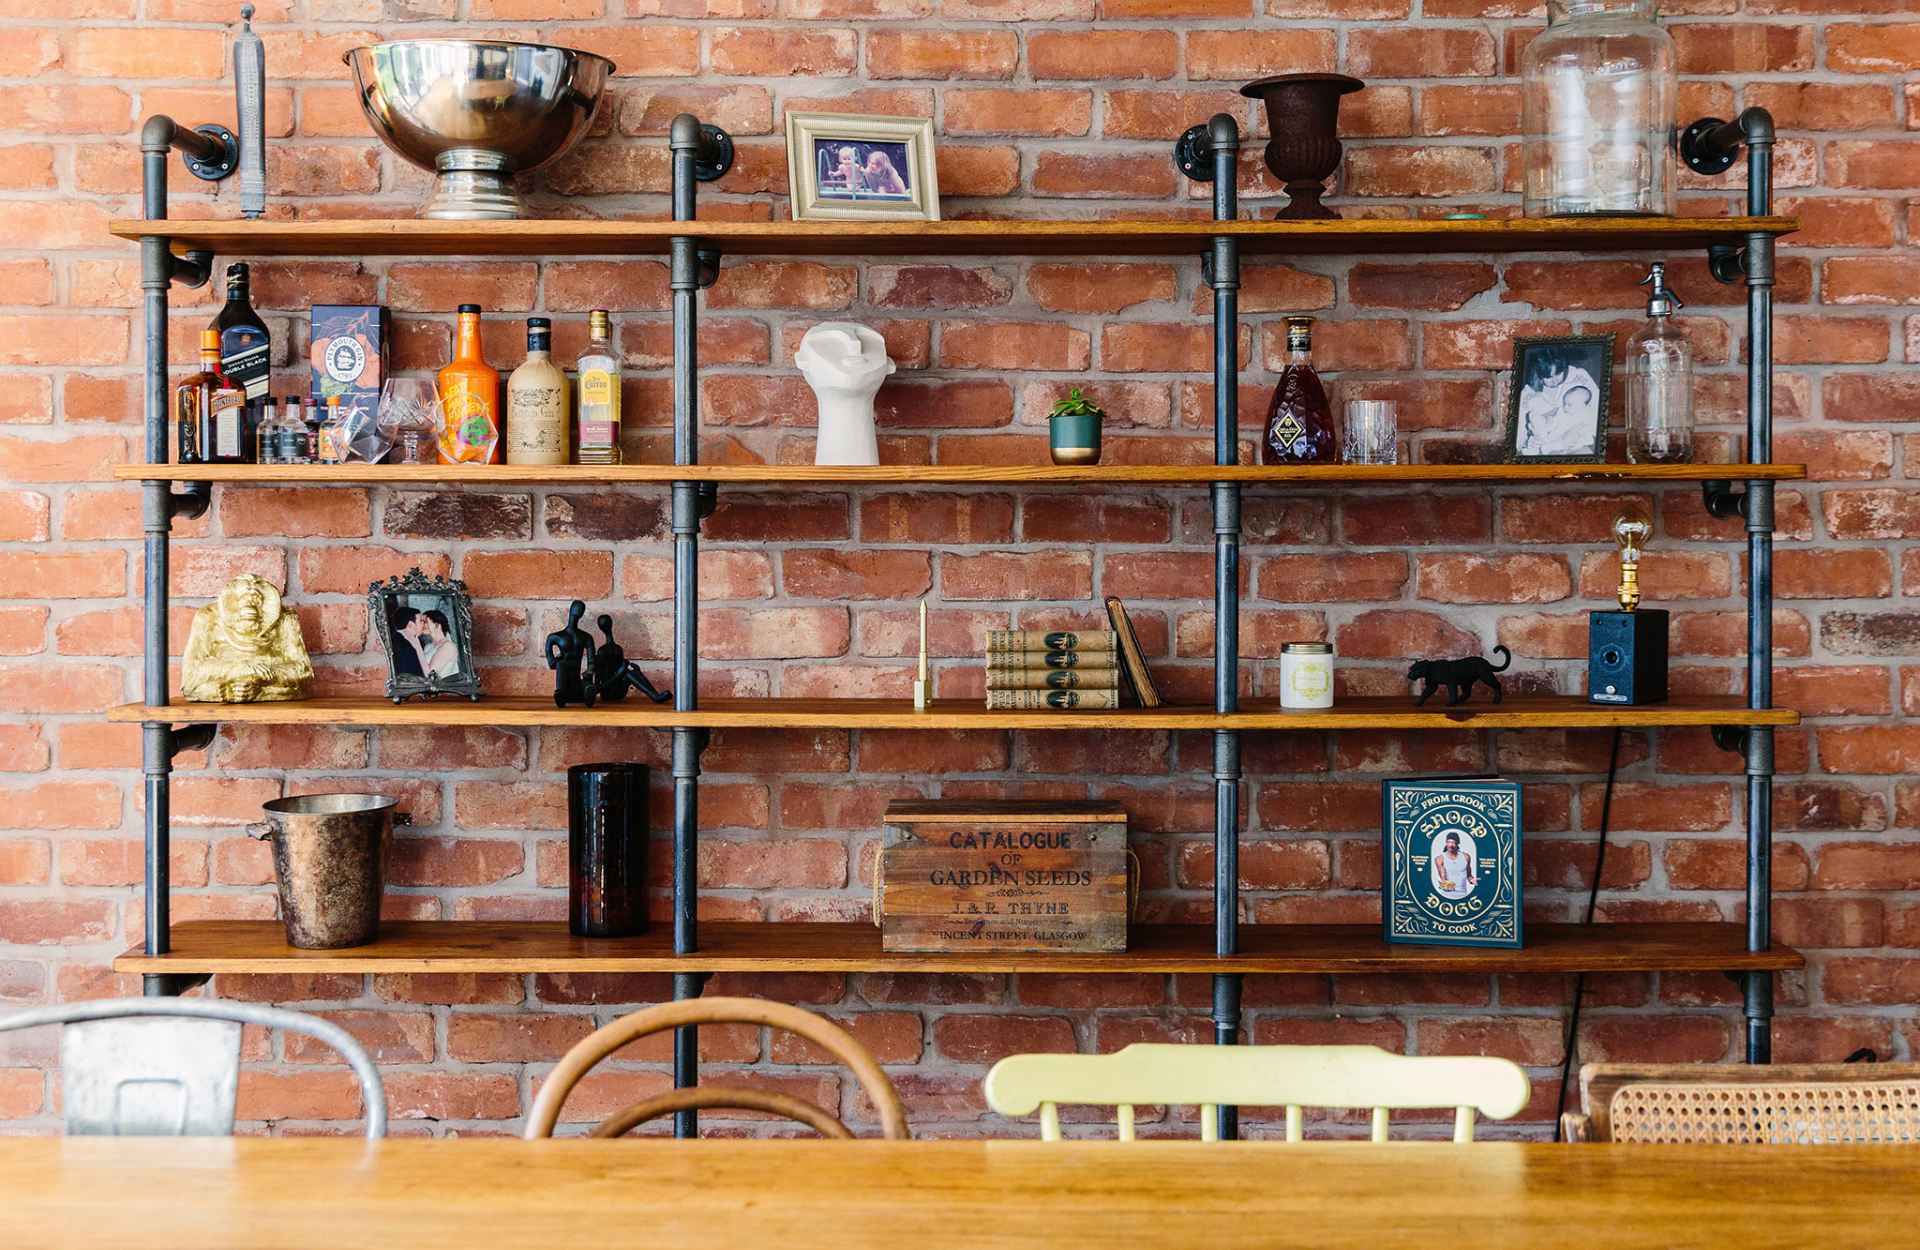 Exposed brick wall with shelves and knick knacks